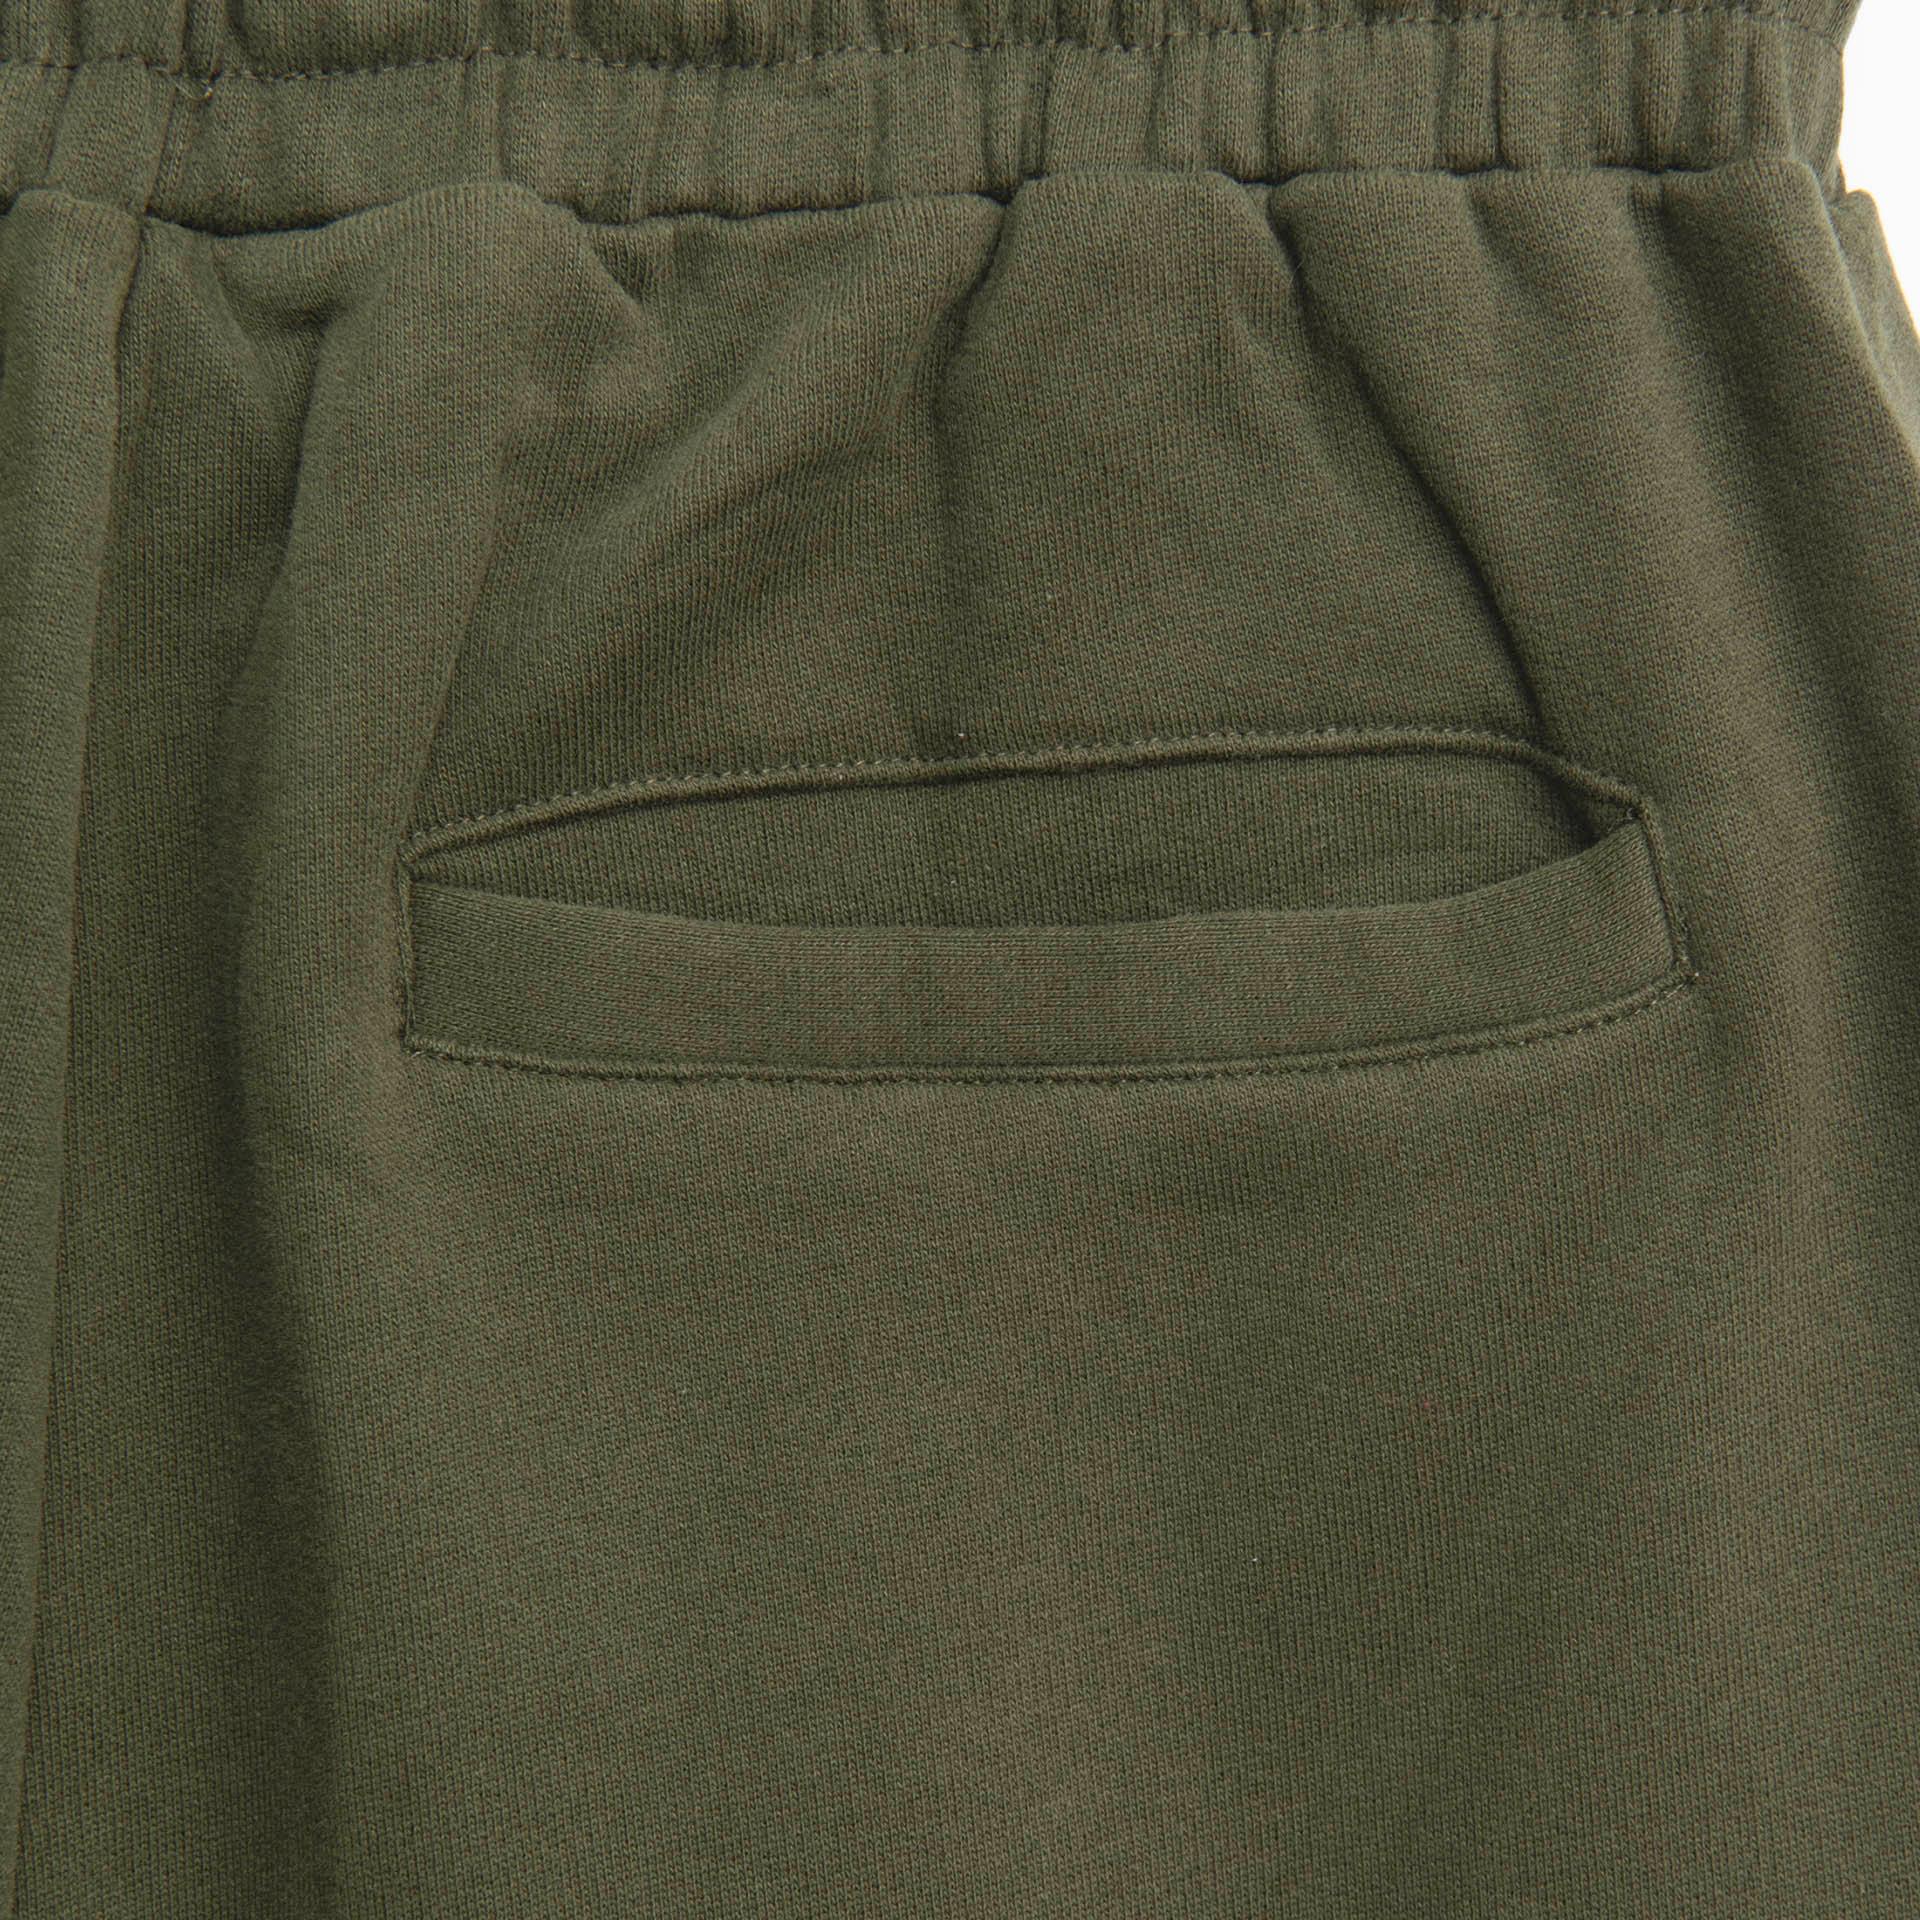 Olive Green Sweatpants From Unisi - WECRE8